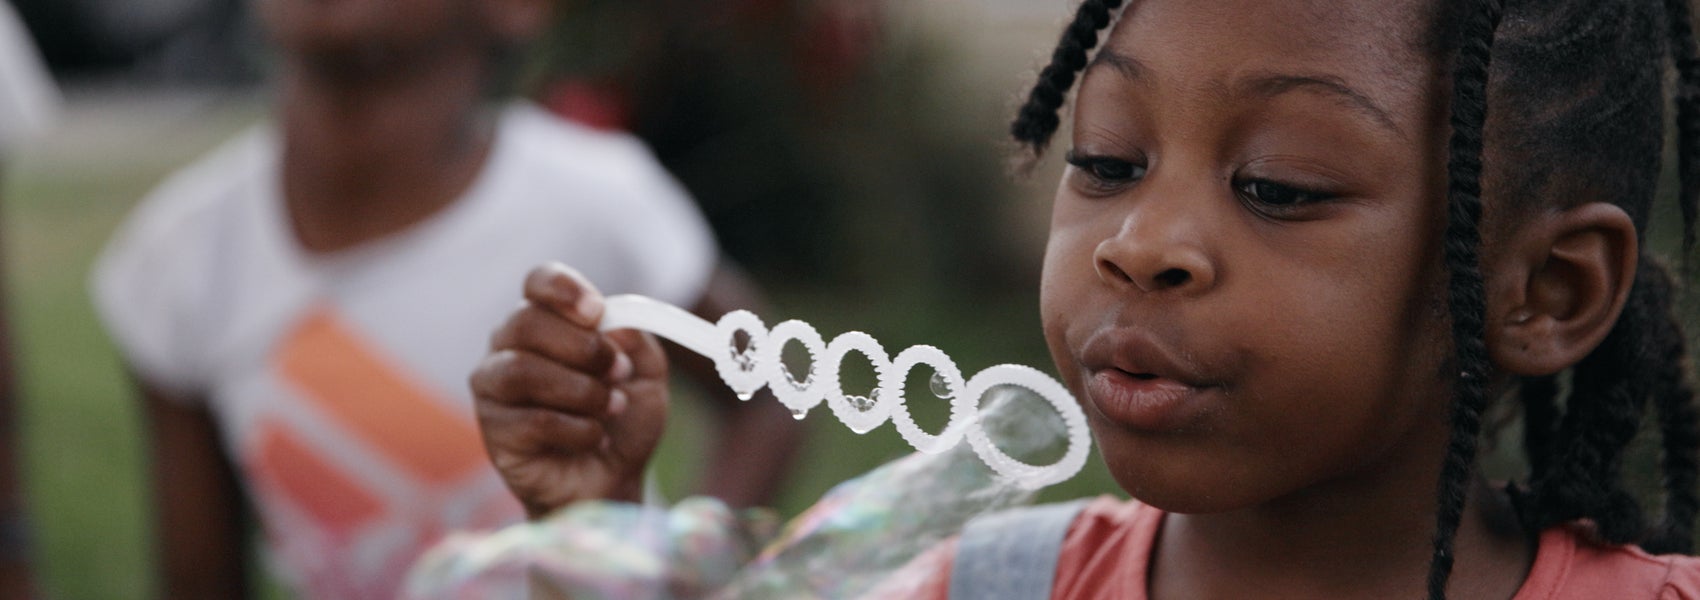 A young girl blows bubbles with her sister